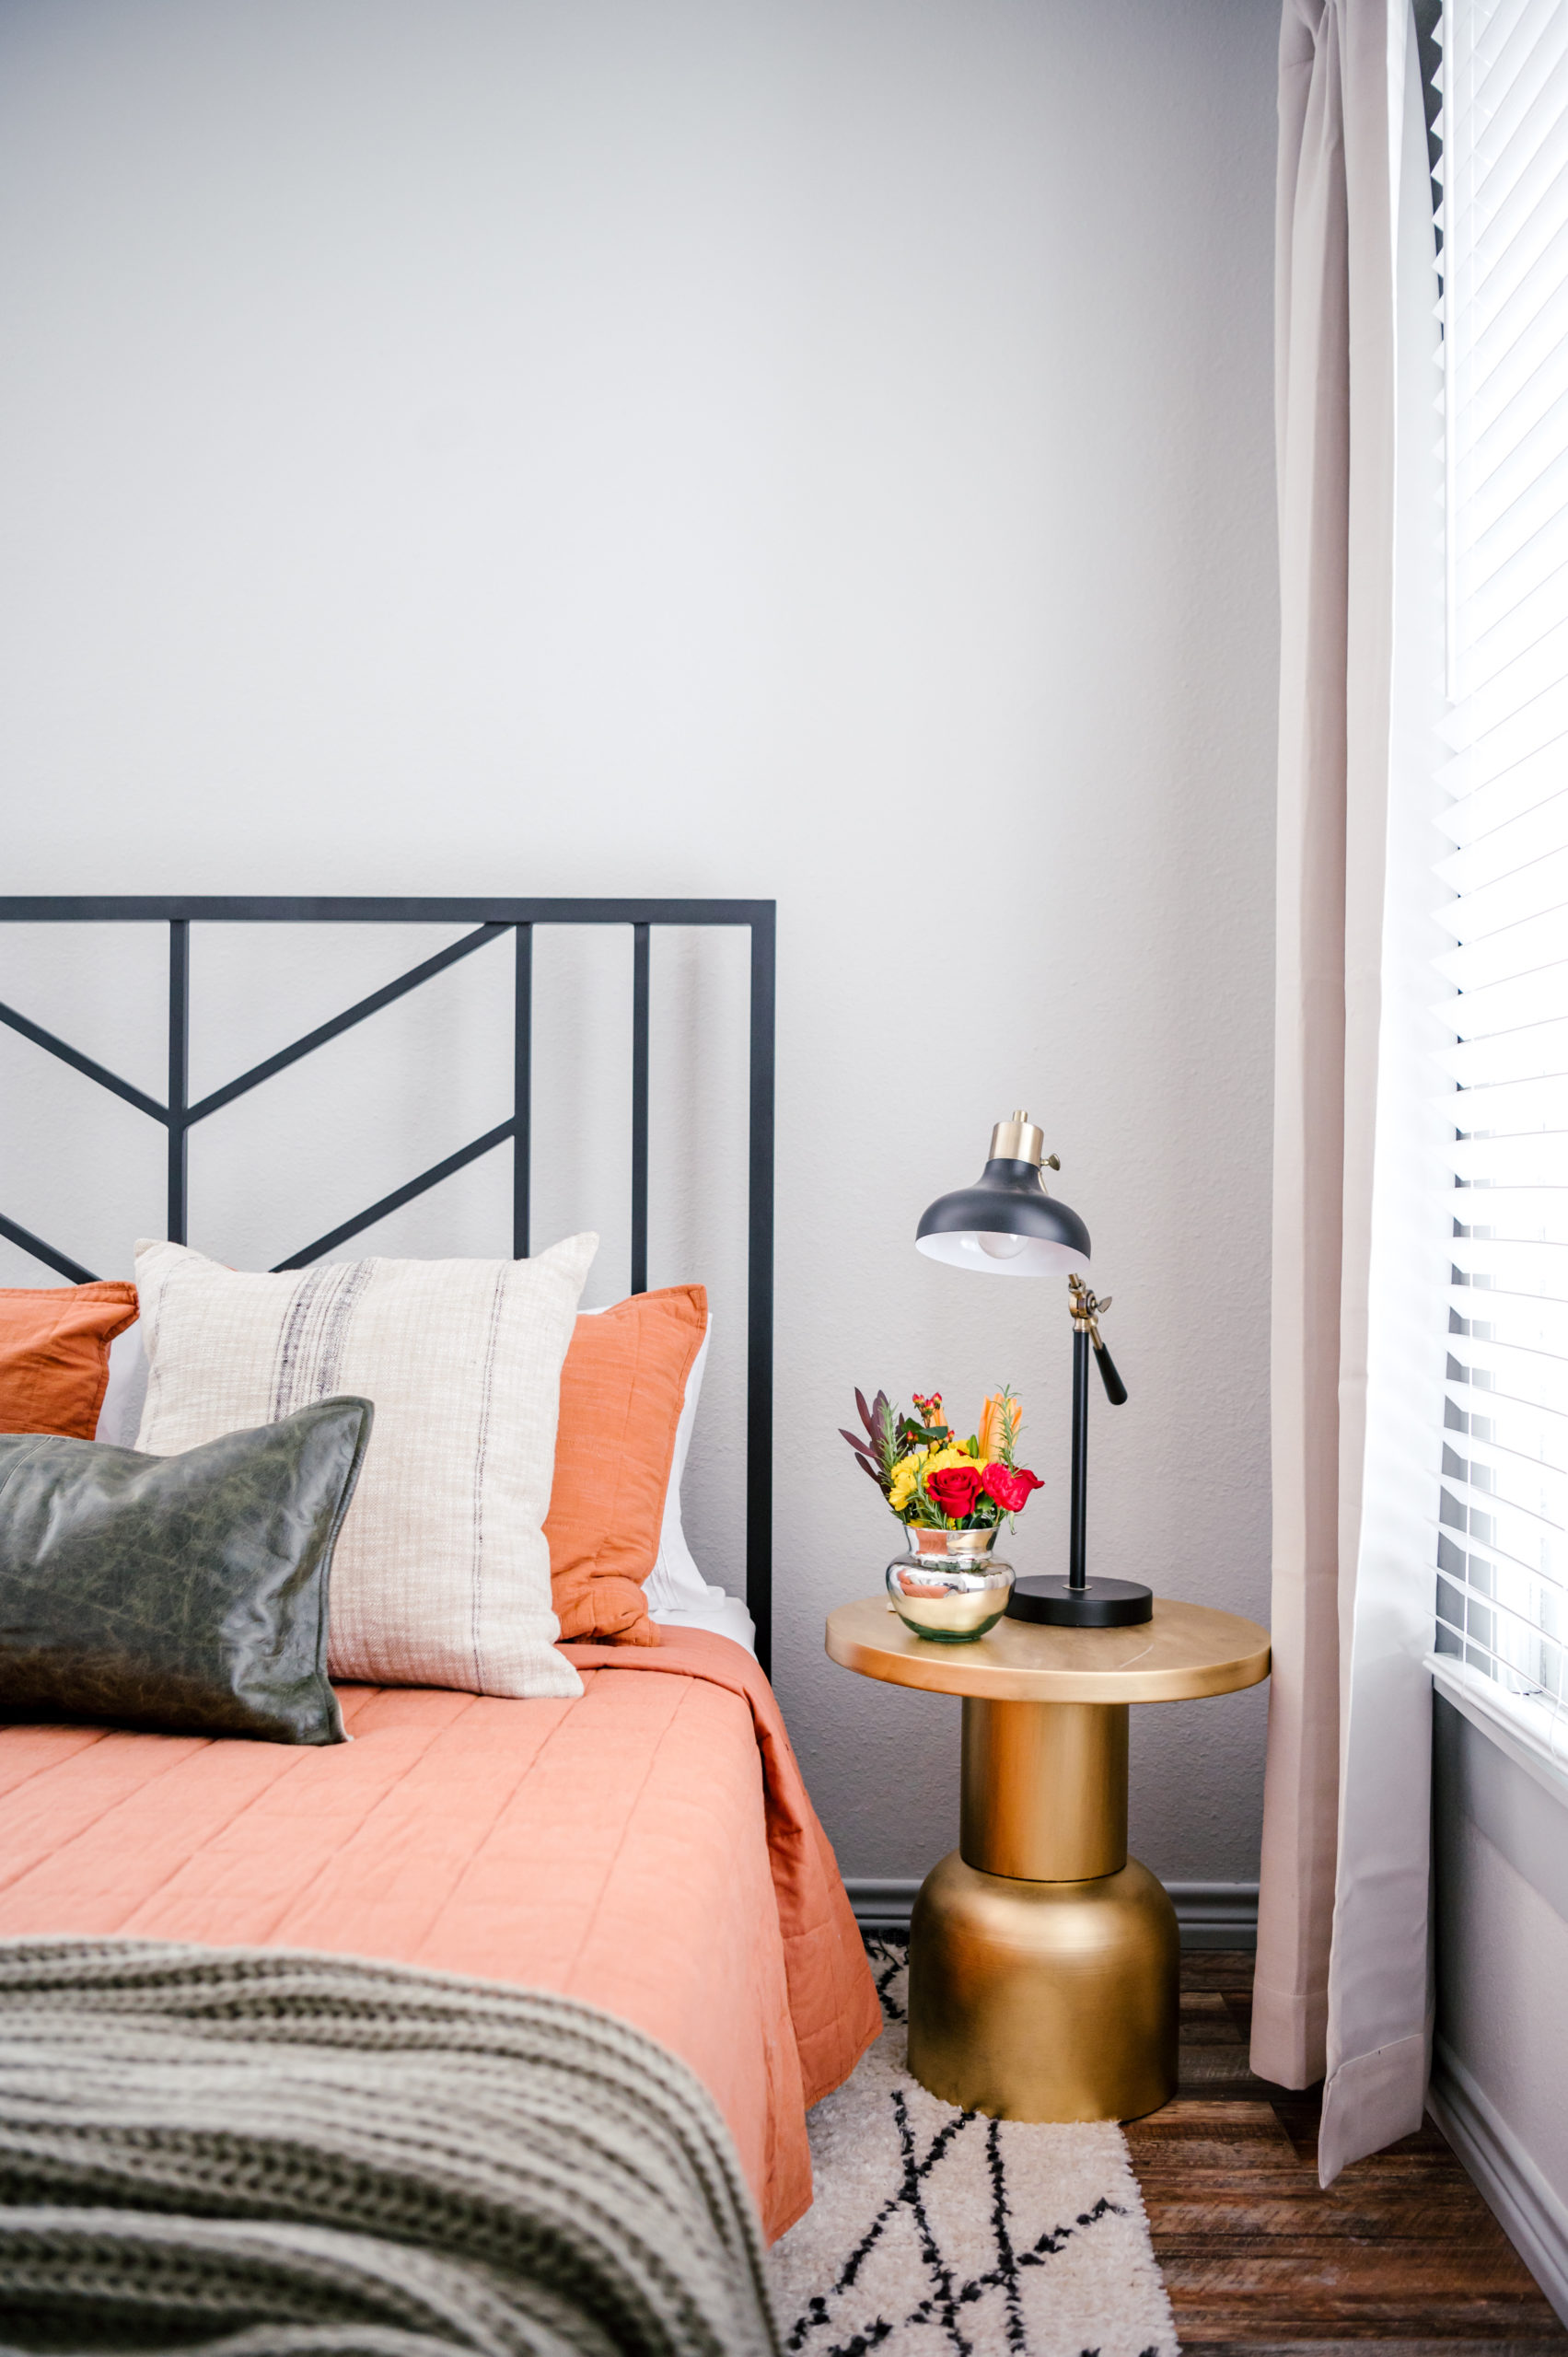 Bedroom interior with queen bed made with an orange comforter and pillows, and gold side table with a black lamp